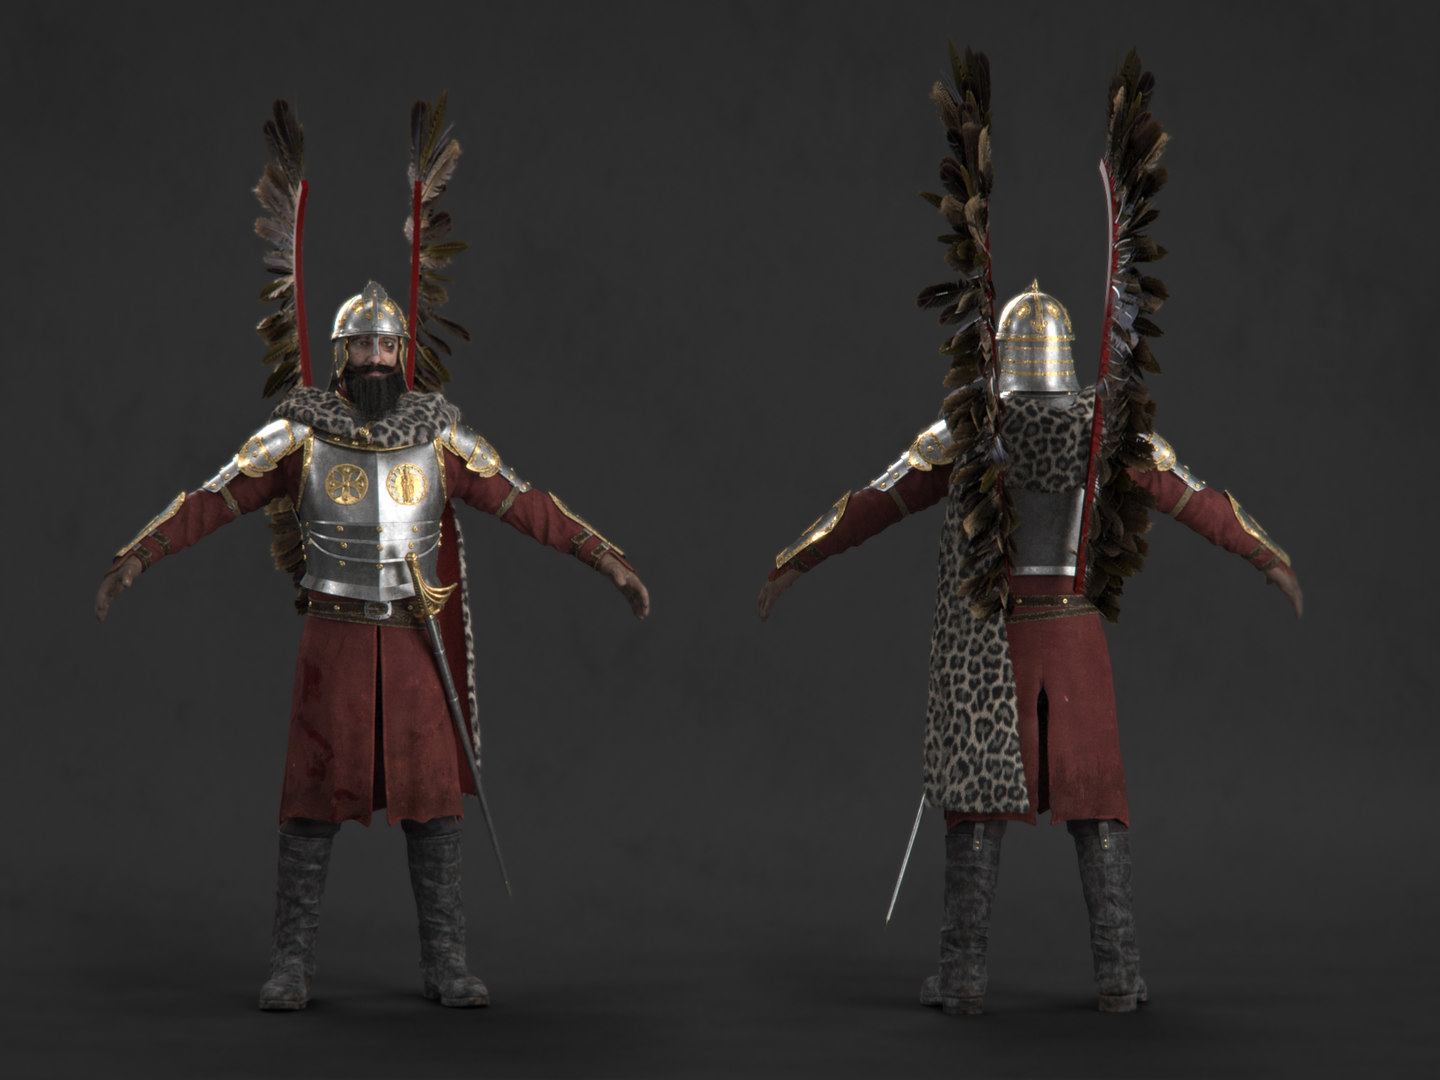  Front and back view of a Polish hussar in full armor, including a kurtka, wings, and leopard fur.